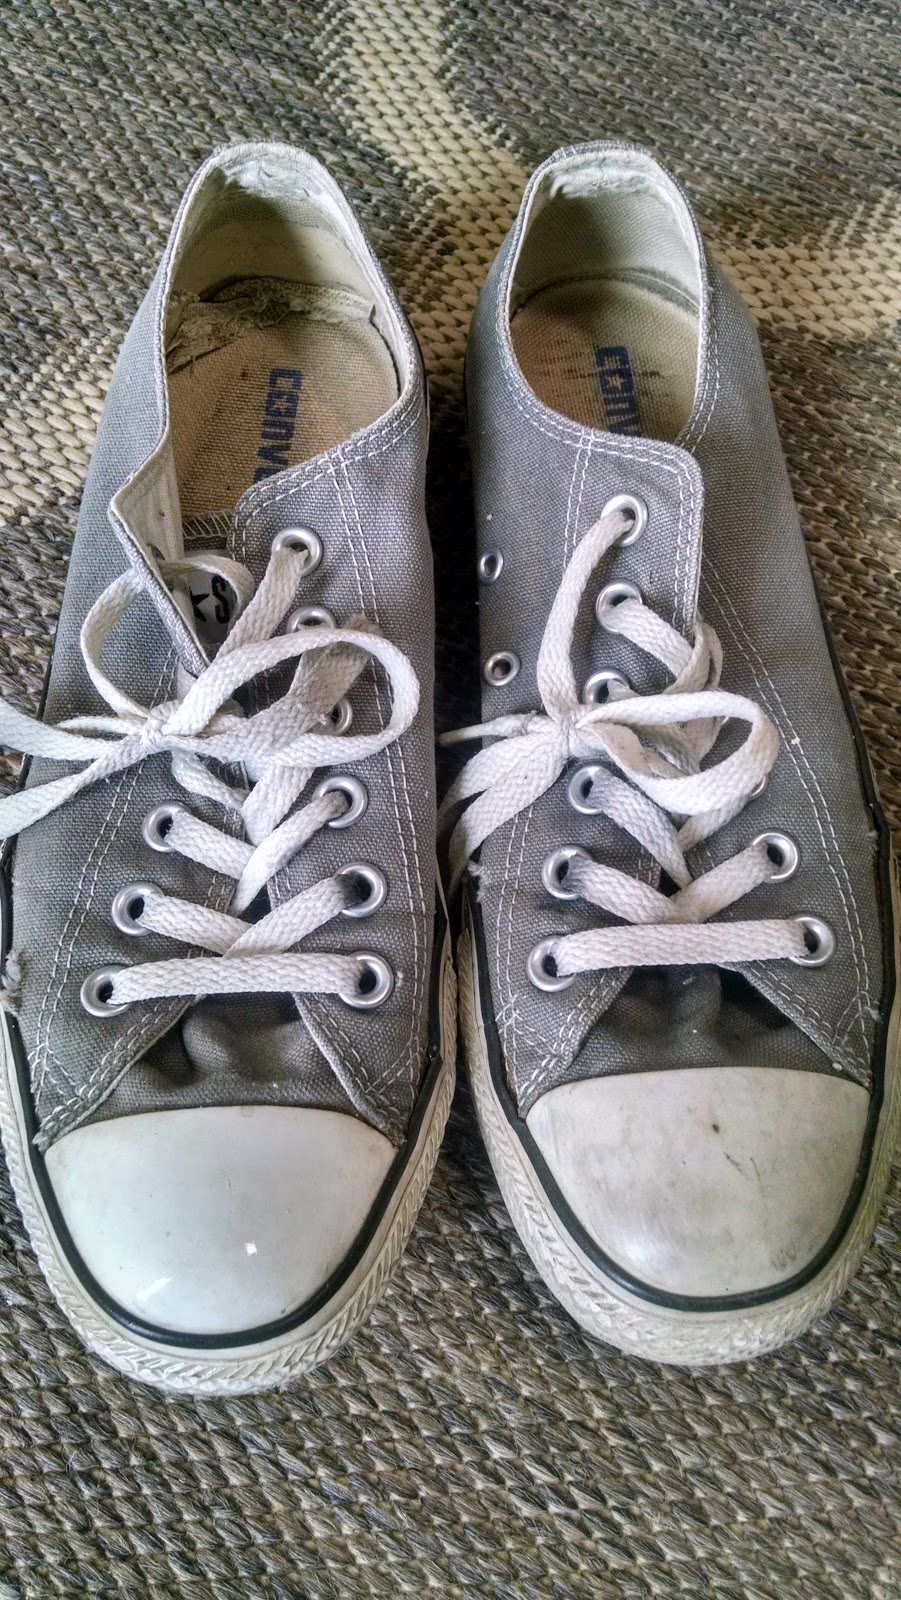 MishMashers: How To Clean Your Kicks (Shoes)